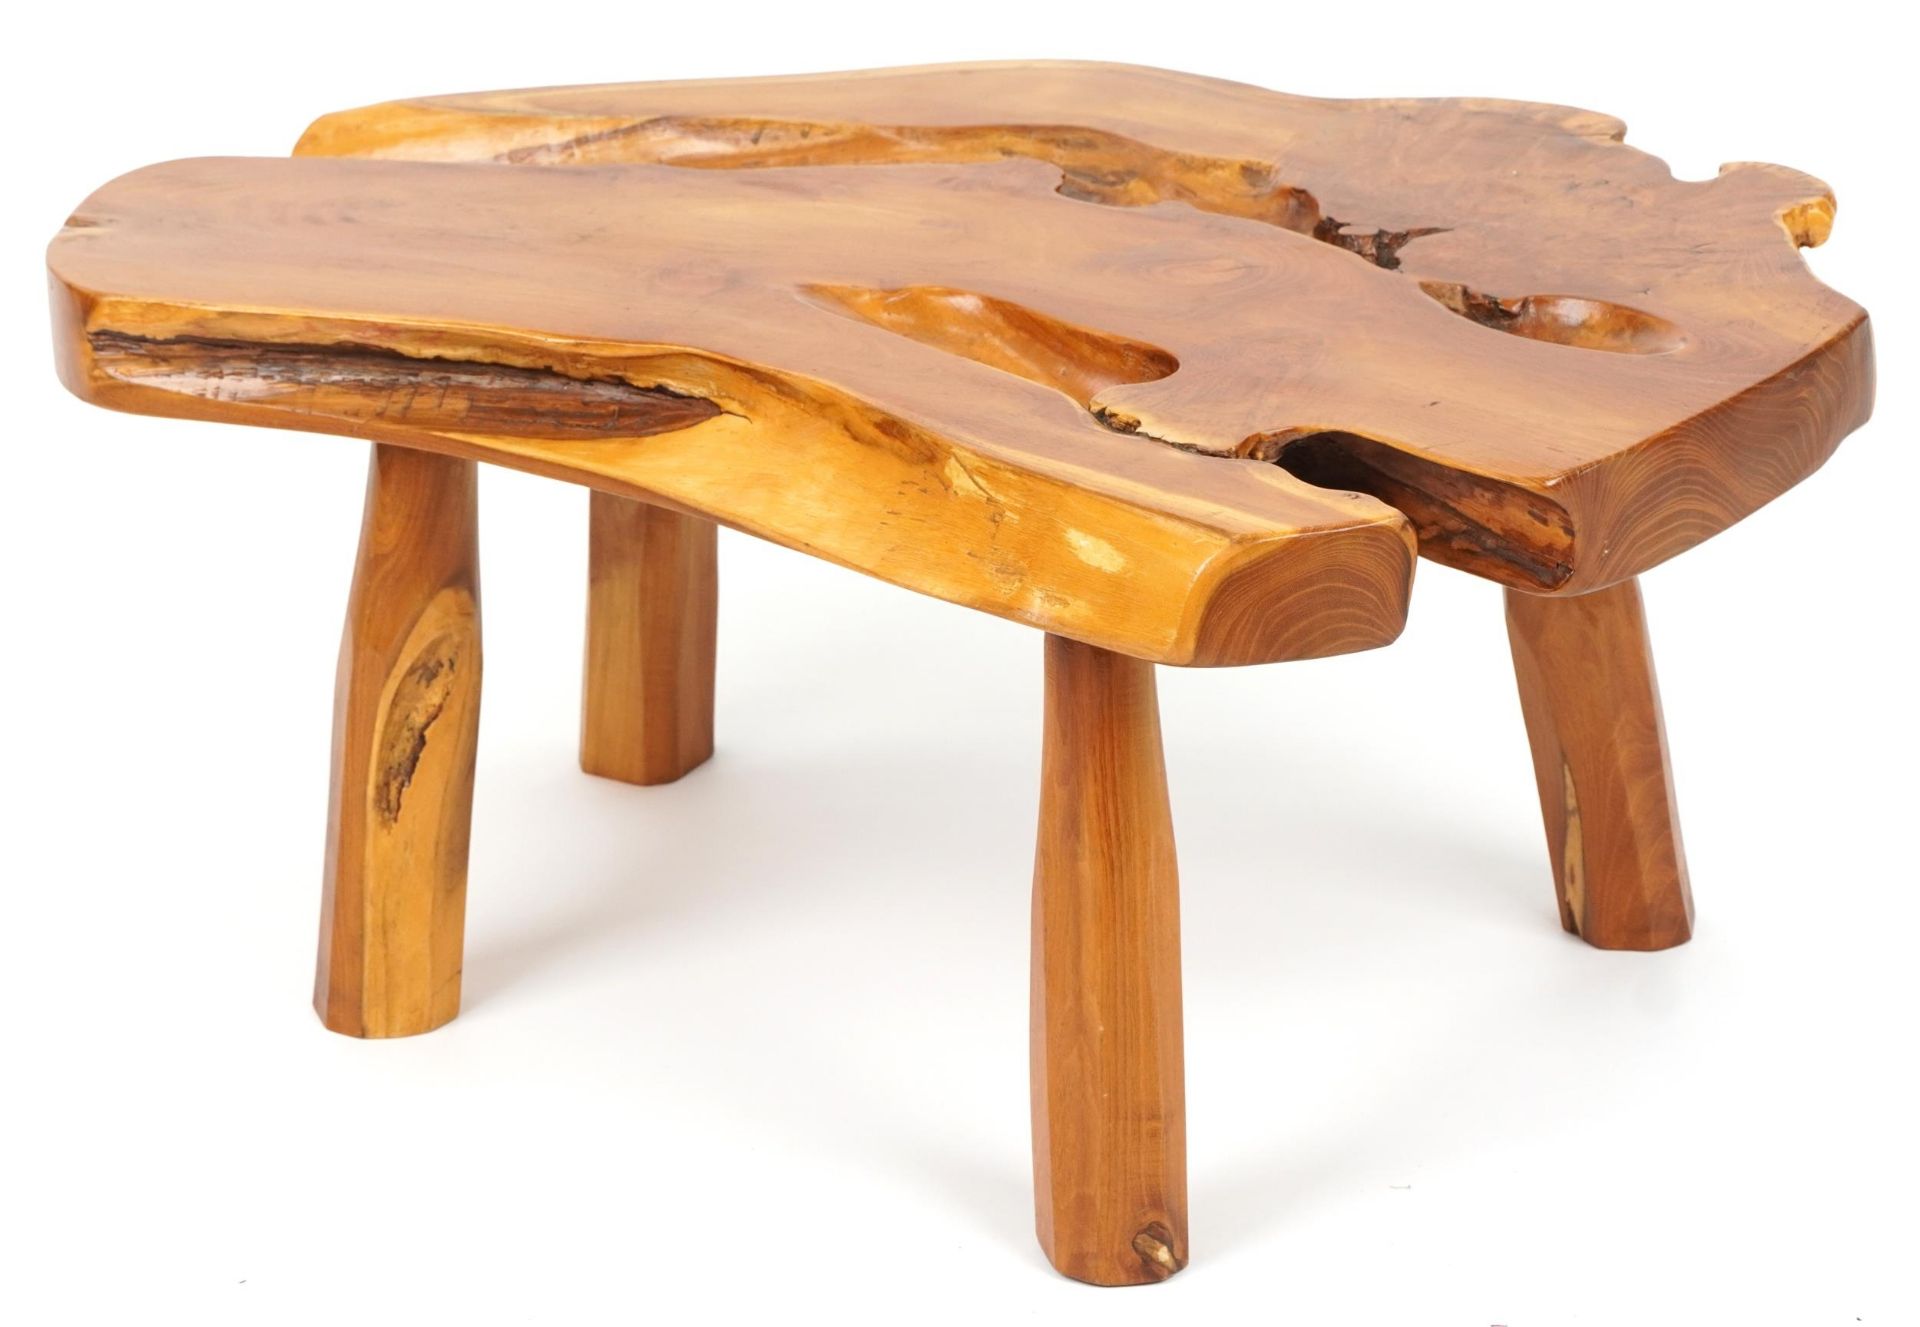 Vintage naturalistic root wood coffee table, 36.5cm H x 84cm W x 57cm D : For further information on